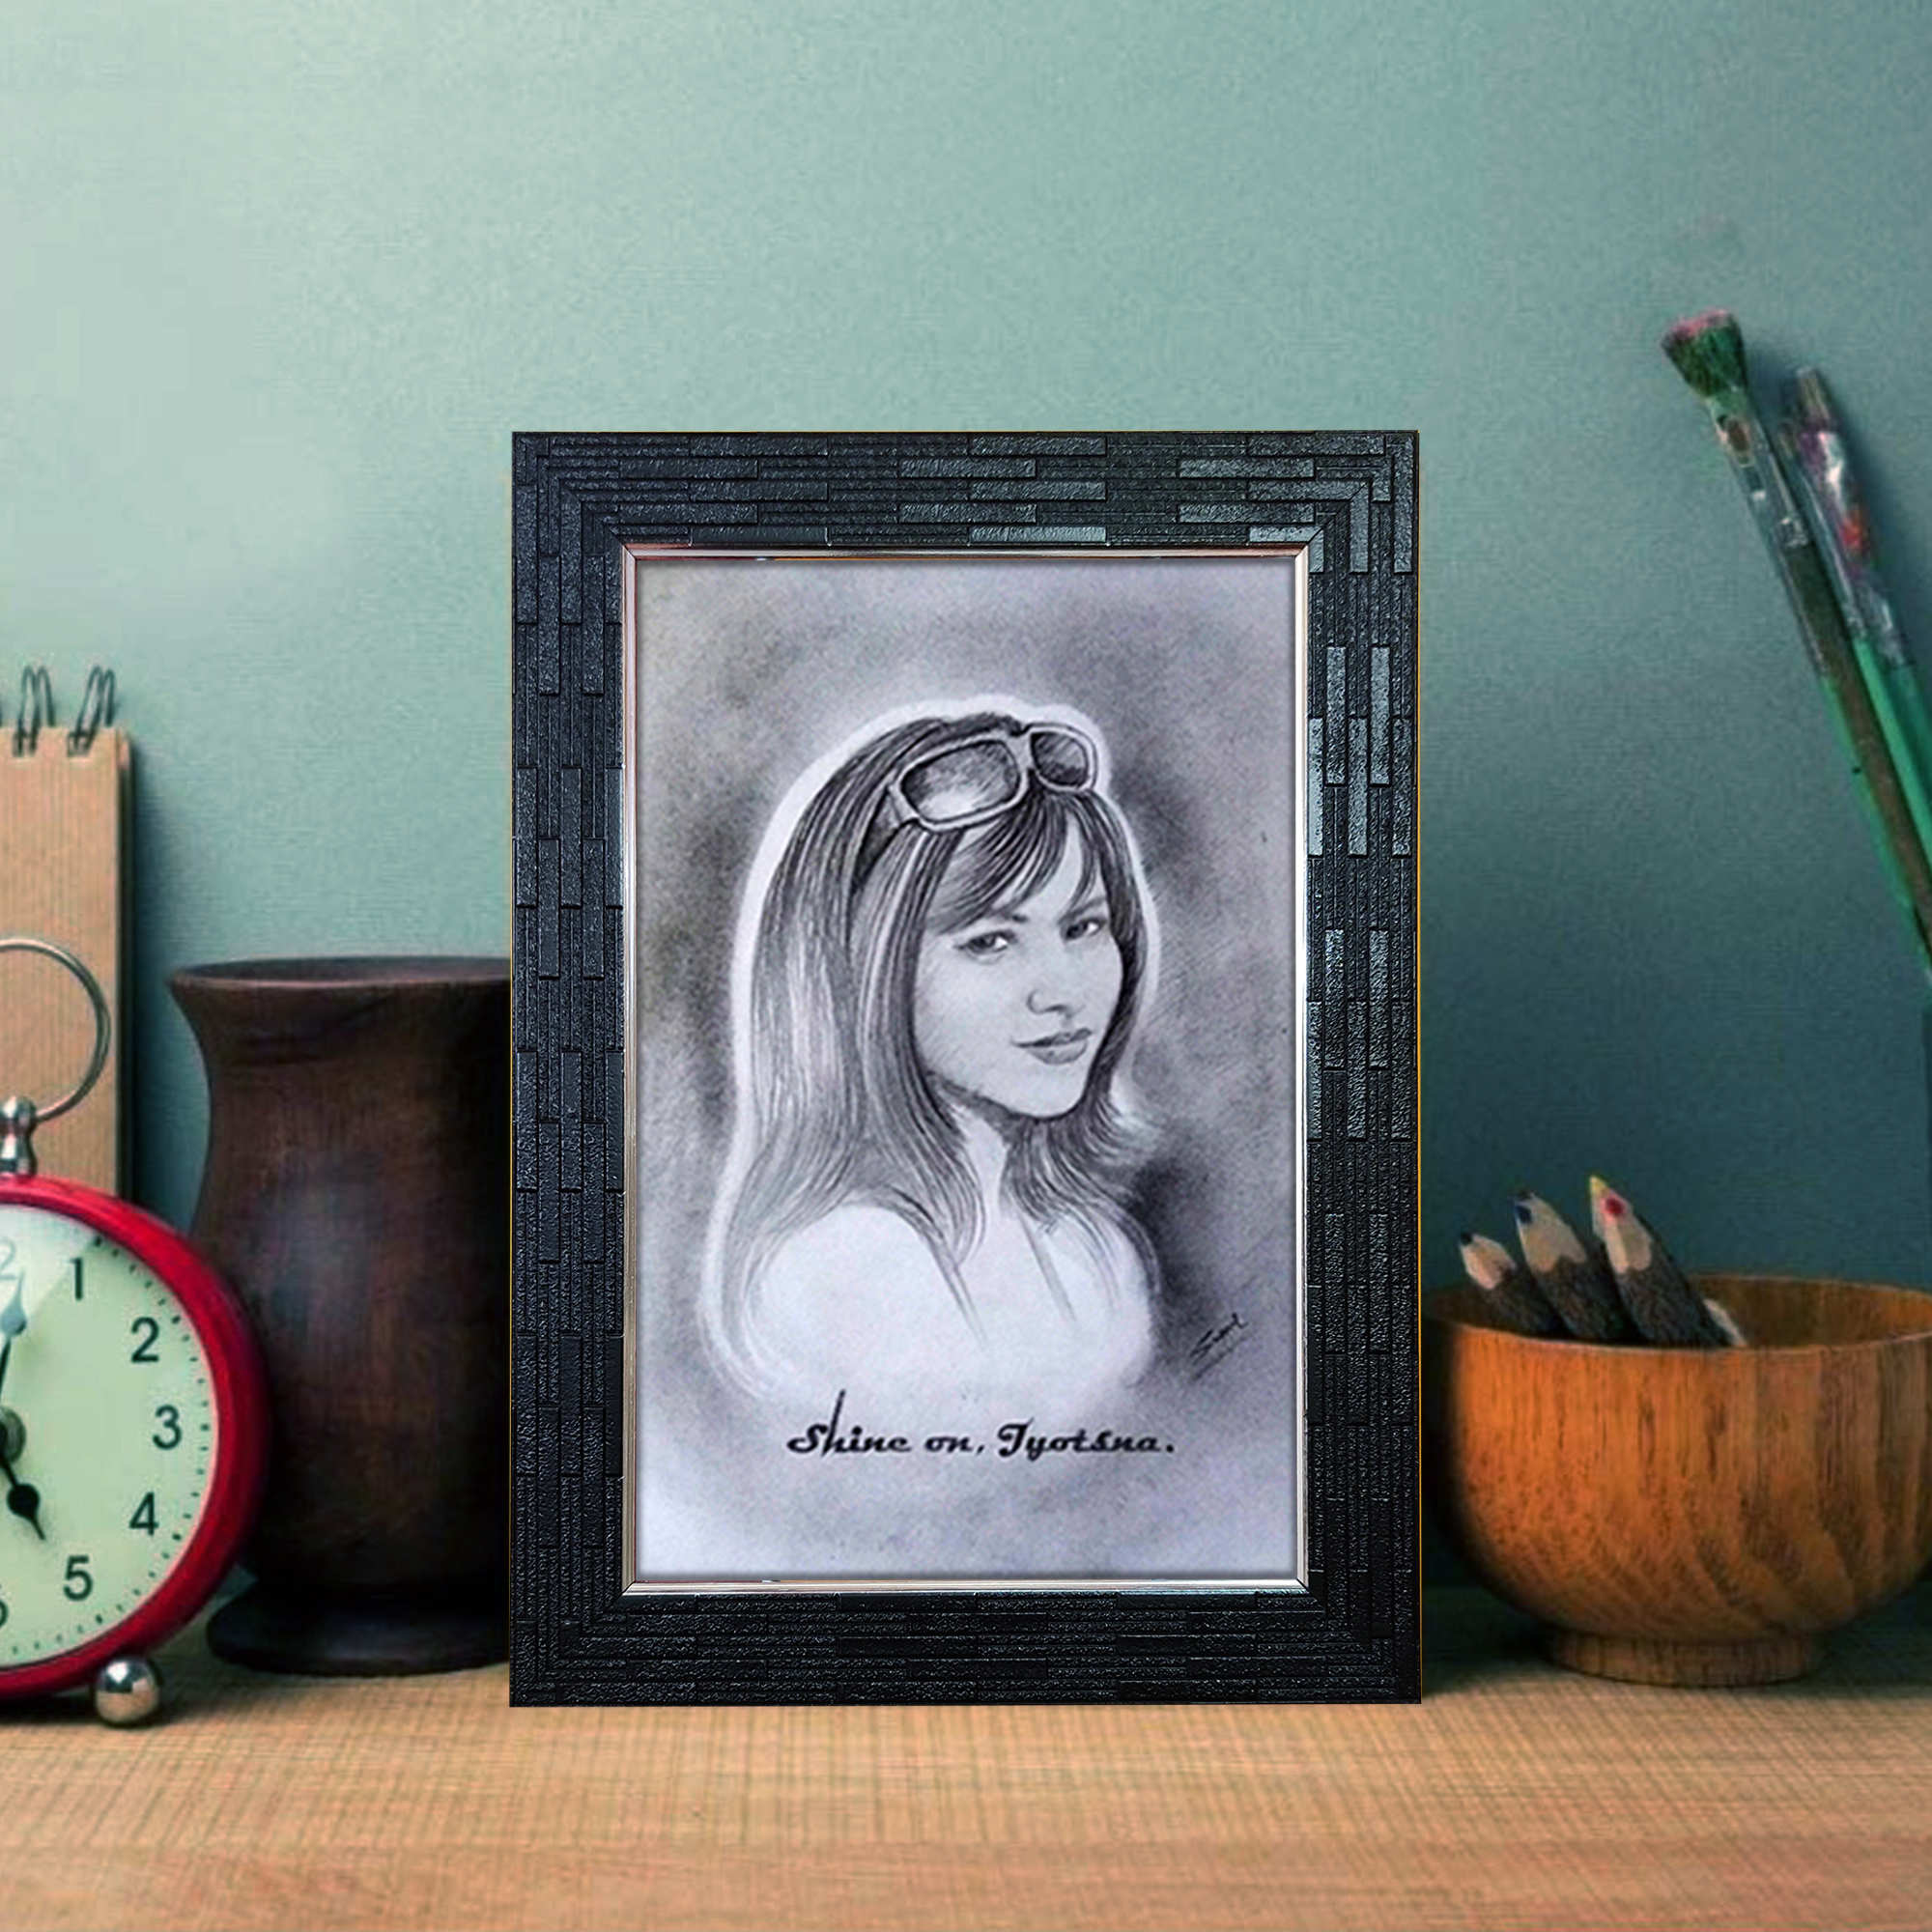 Order Photo to Sketch - Handmade portrait Online - Free shipping